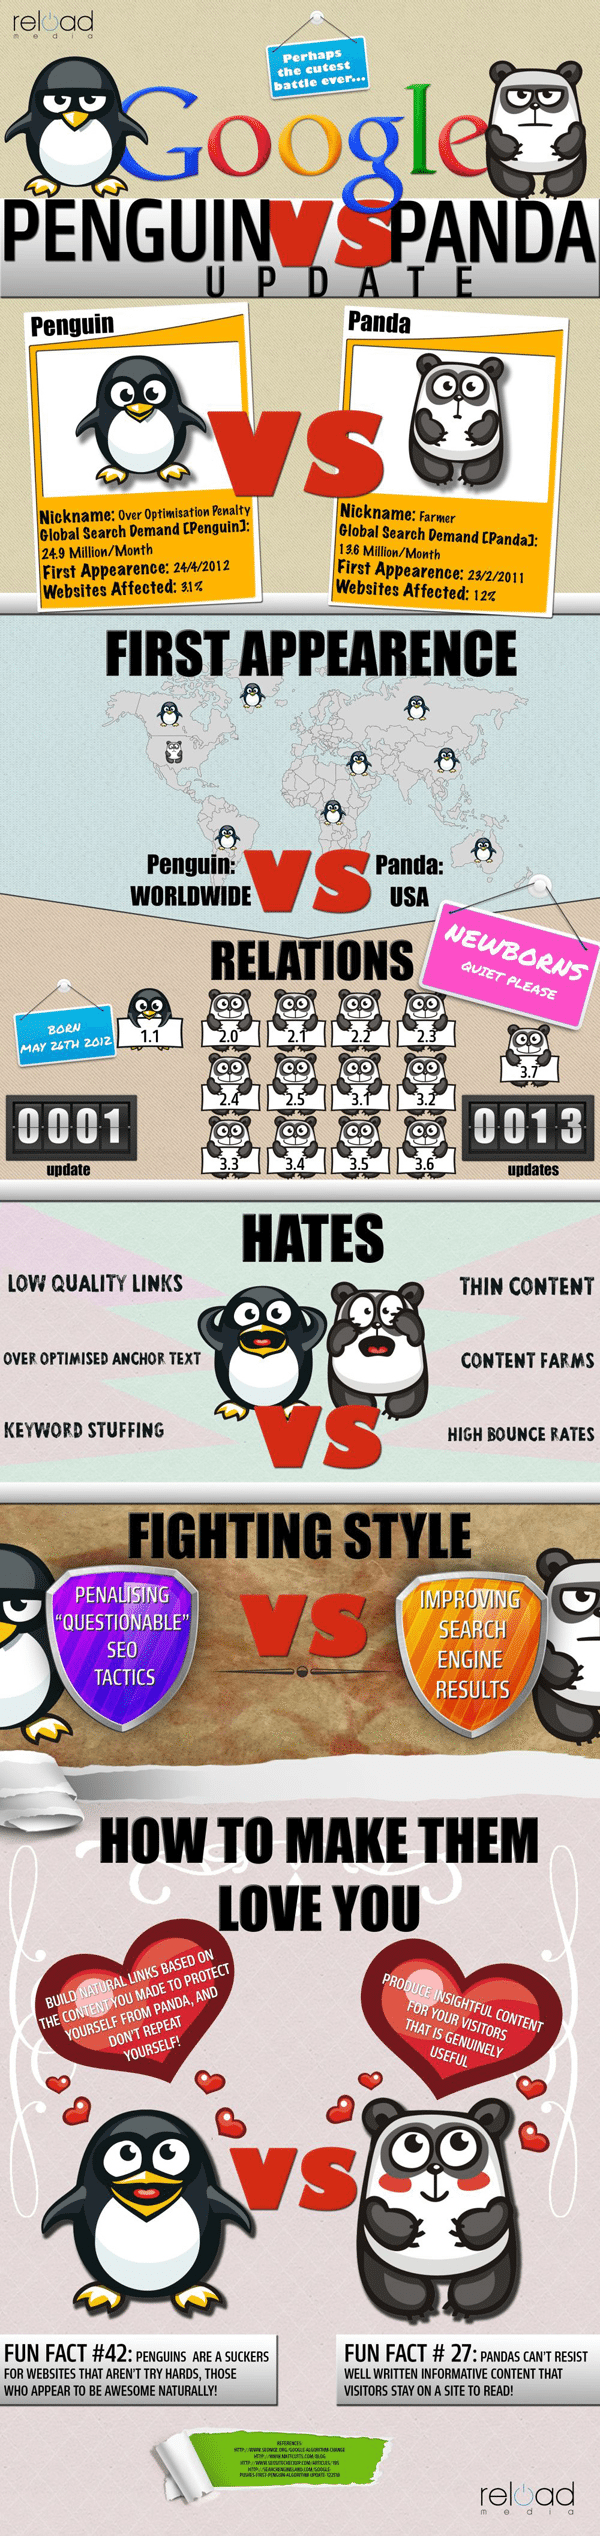 The difference between Google Panda and Penguin Algorithm Changes Infographic